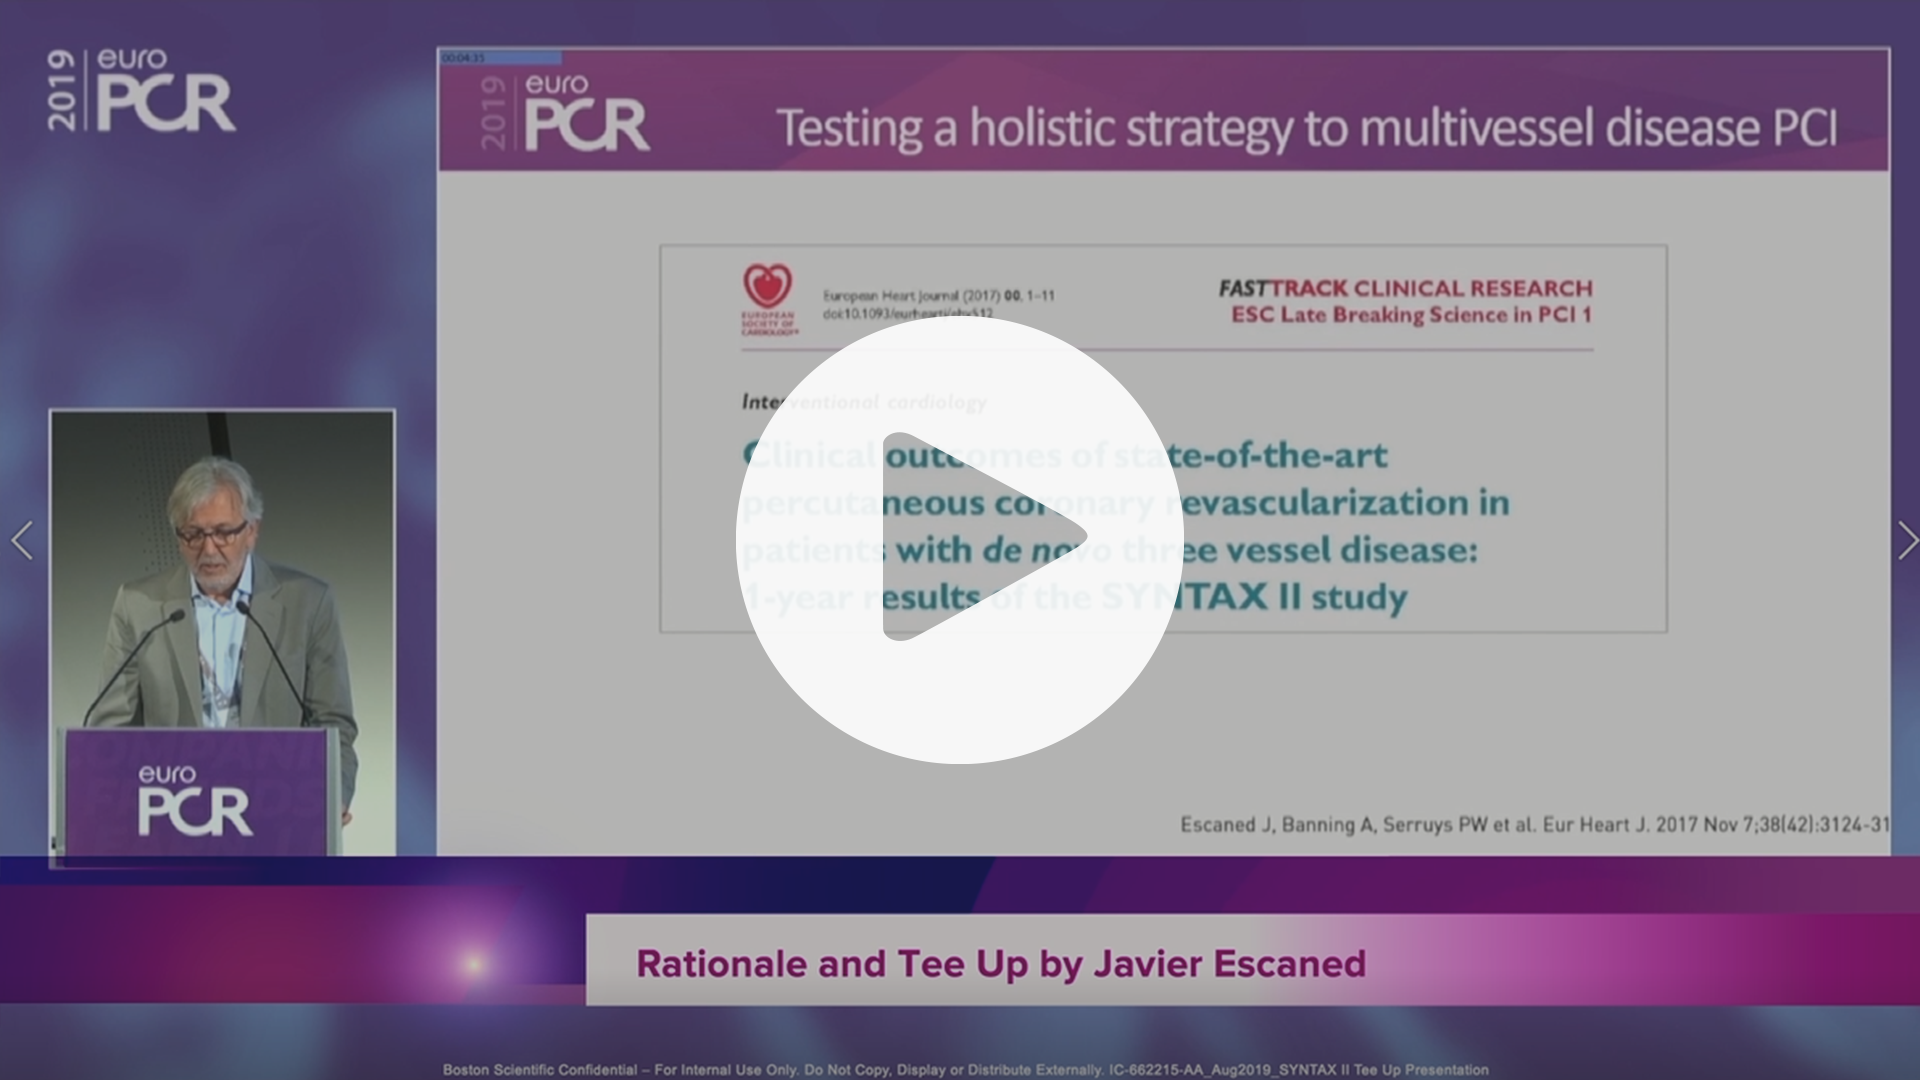 SYNTAX II Rationale and Tee Up by Javier Escaned, VIdeo